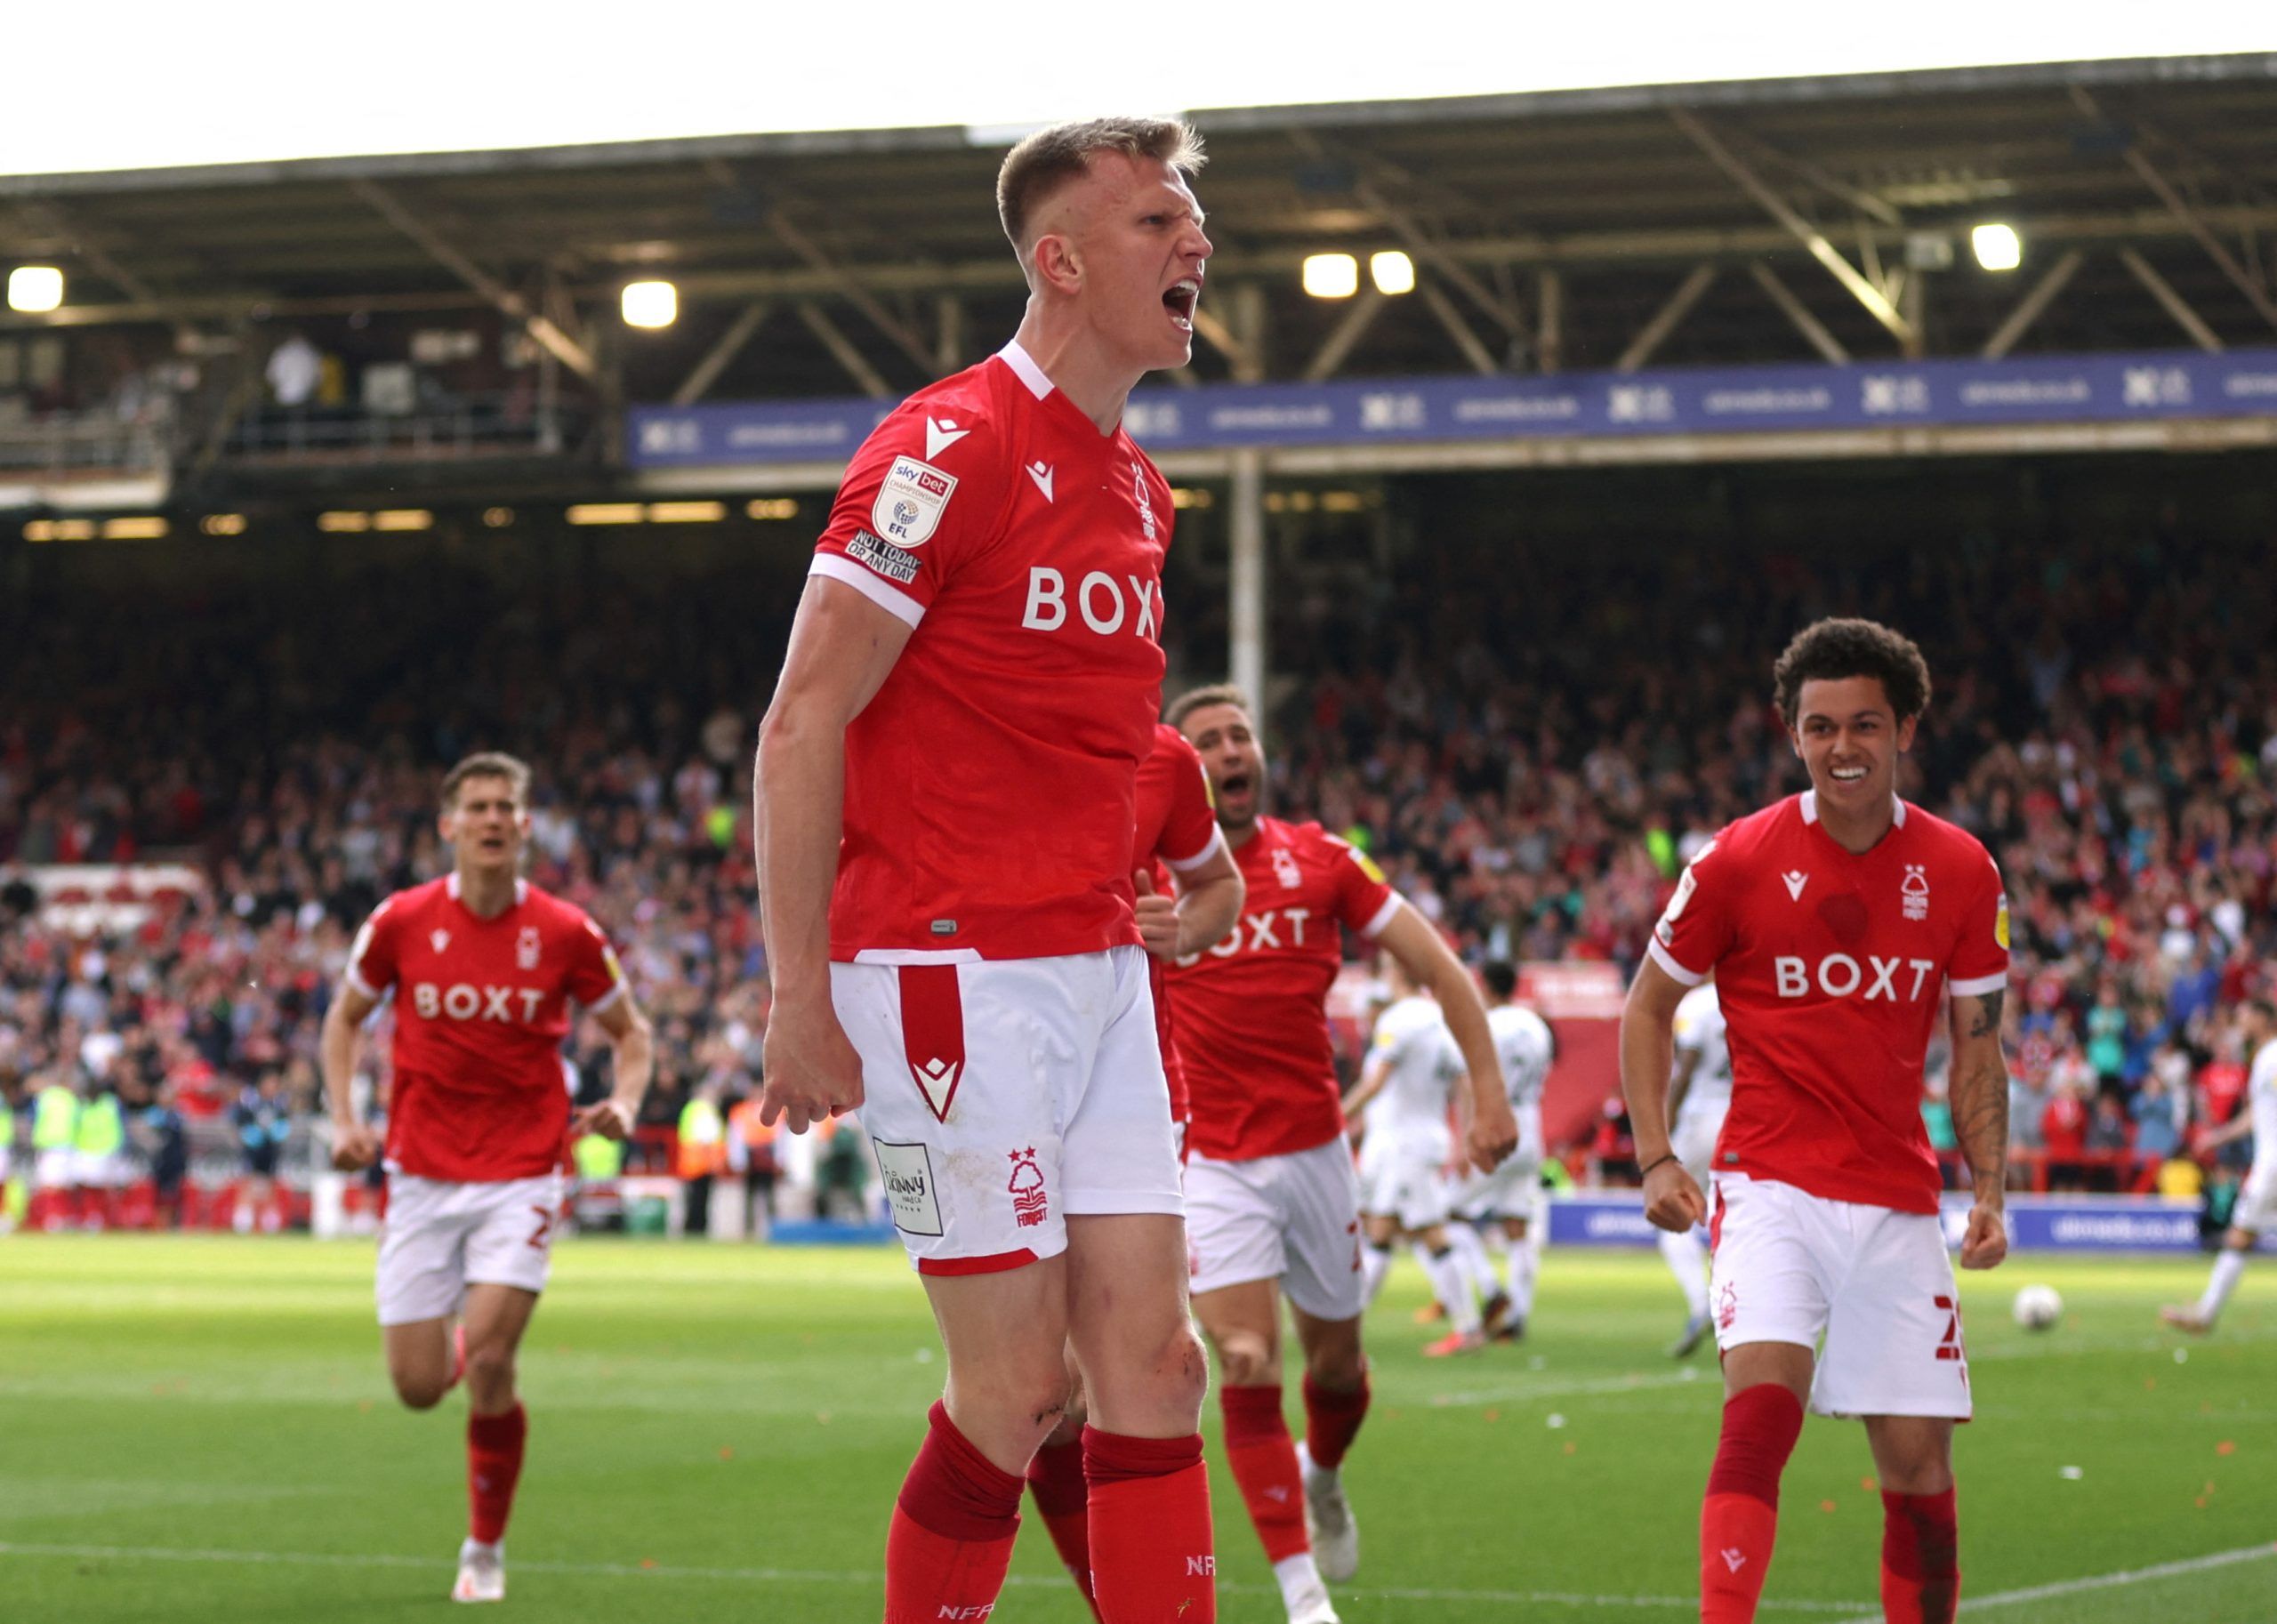 nottingham-forest-injury-boost-vs-sheffield-united-play-off-semi-final-steve-cooper-ryan-yates-jack-colbackSoccer Football - Championship - Nottingham Forest v Swansea City - The City Ground, Nottingham, Britain - April 30, 2022 Nottingham Forest's Sam Surridge celebrates scoring their second goal  Action Images/Matthew Childs  EDITORIAL USE ONLY. No use with unauthorized audio, video, data, fixture lists, club/league logos or 